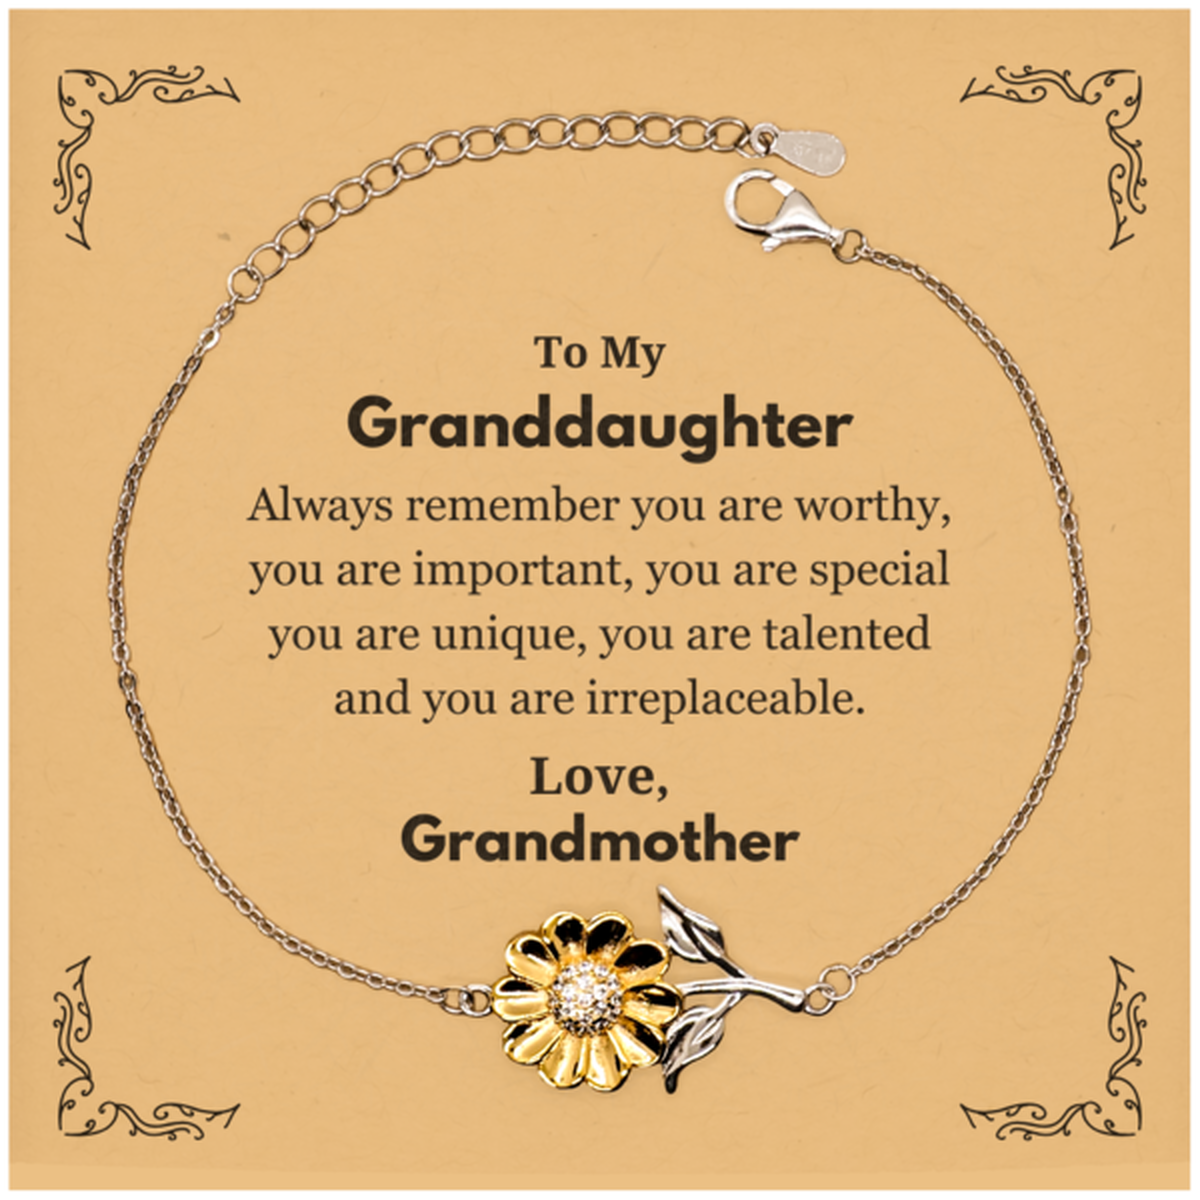 Granddaughter Birthday Gifts from Grandmother, Inspirational Sunflower Bracelet for Granddaughter Christmas Graduation Gifts for Granddaughter Always remember you are worthy, you are important. Love, Grandmother